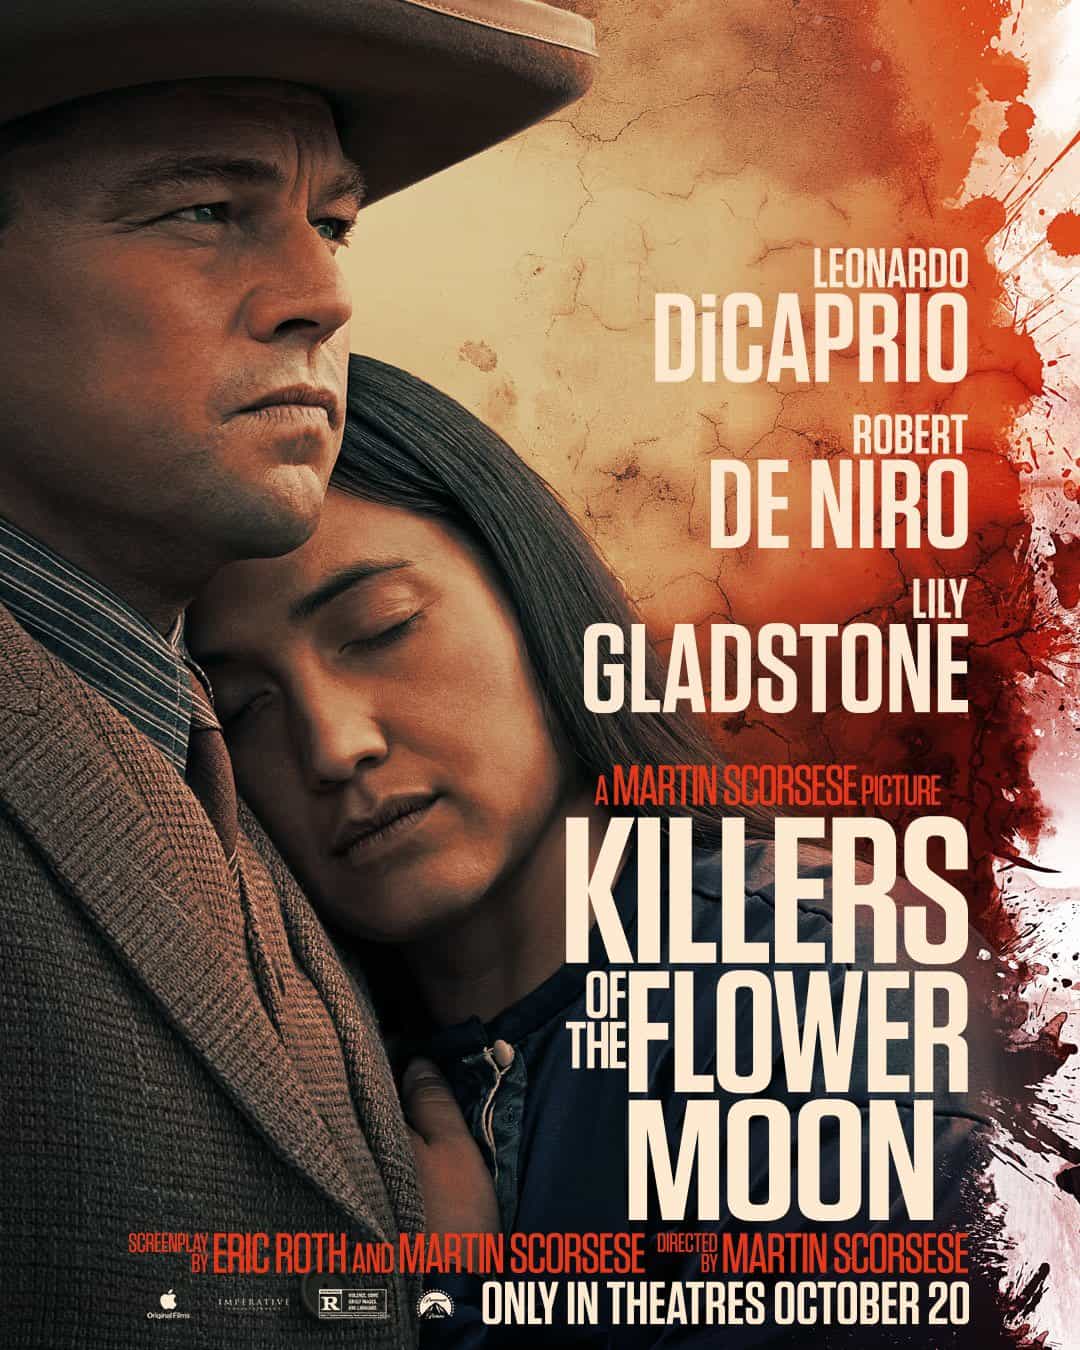 Global Box Office Weekend Report 20th - 22nd October 2023:  Killers of the Flower Moon makes its debut on the global box office at the top with $44 Million